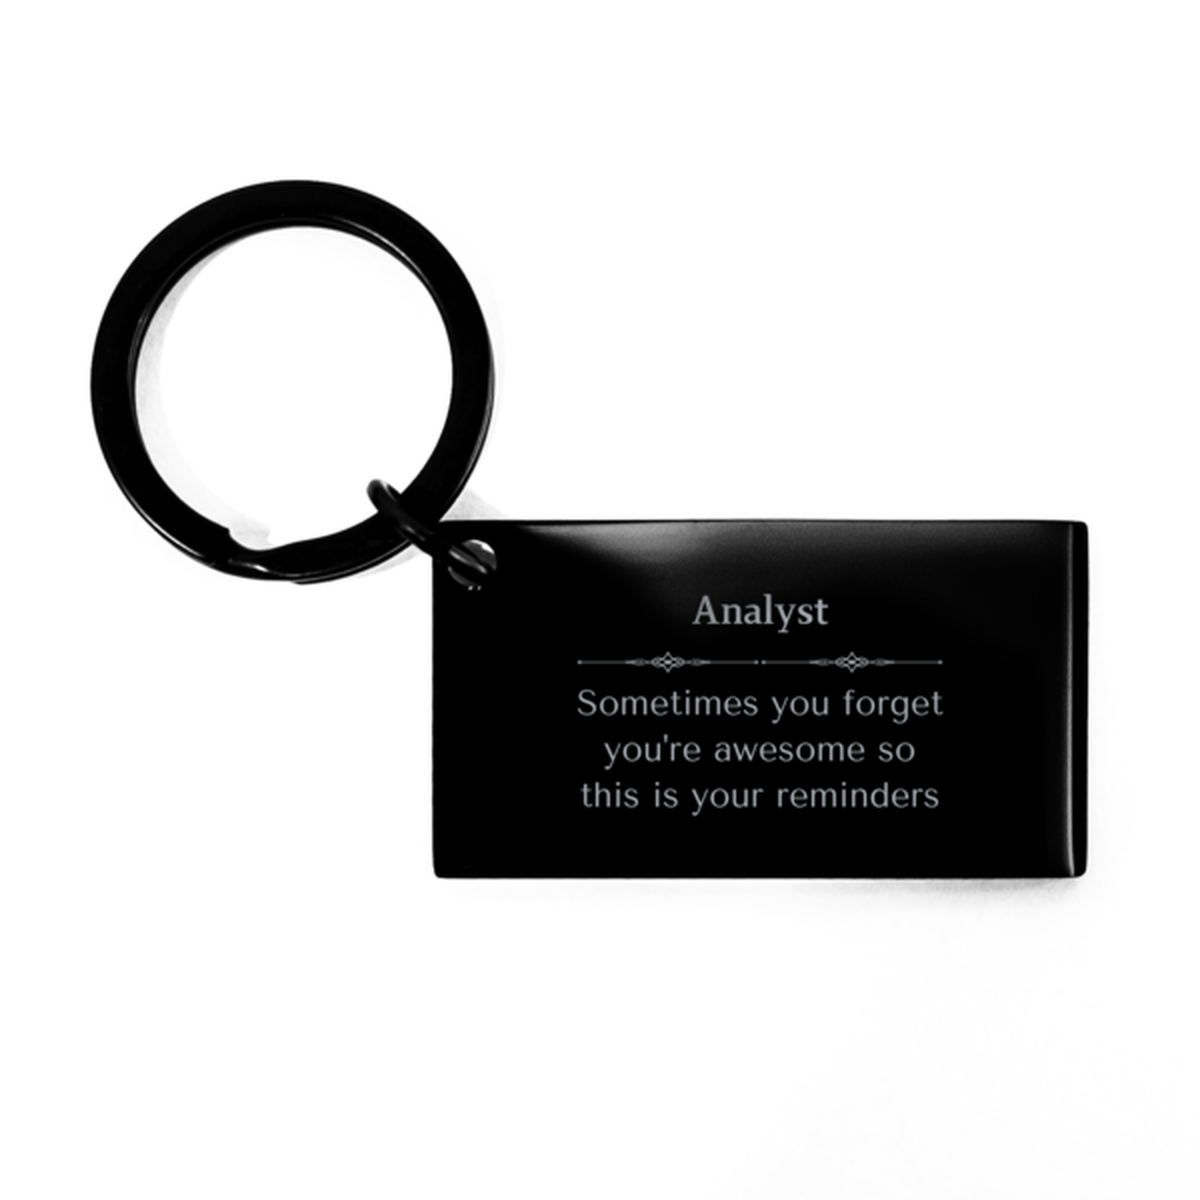 Sentimental Analyst Keychain, Civil Engineer Sometimes you forget you're awesome so this is your reminders, Graduation Christmas Birthday Gifts for Analyst, Men, Women, Coworkers